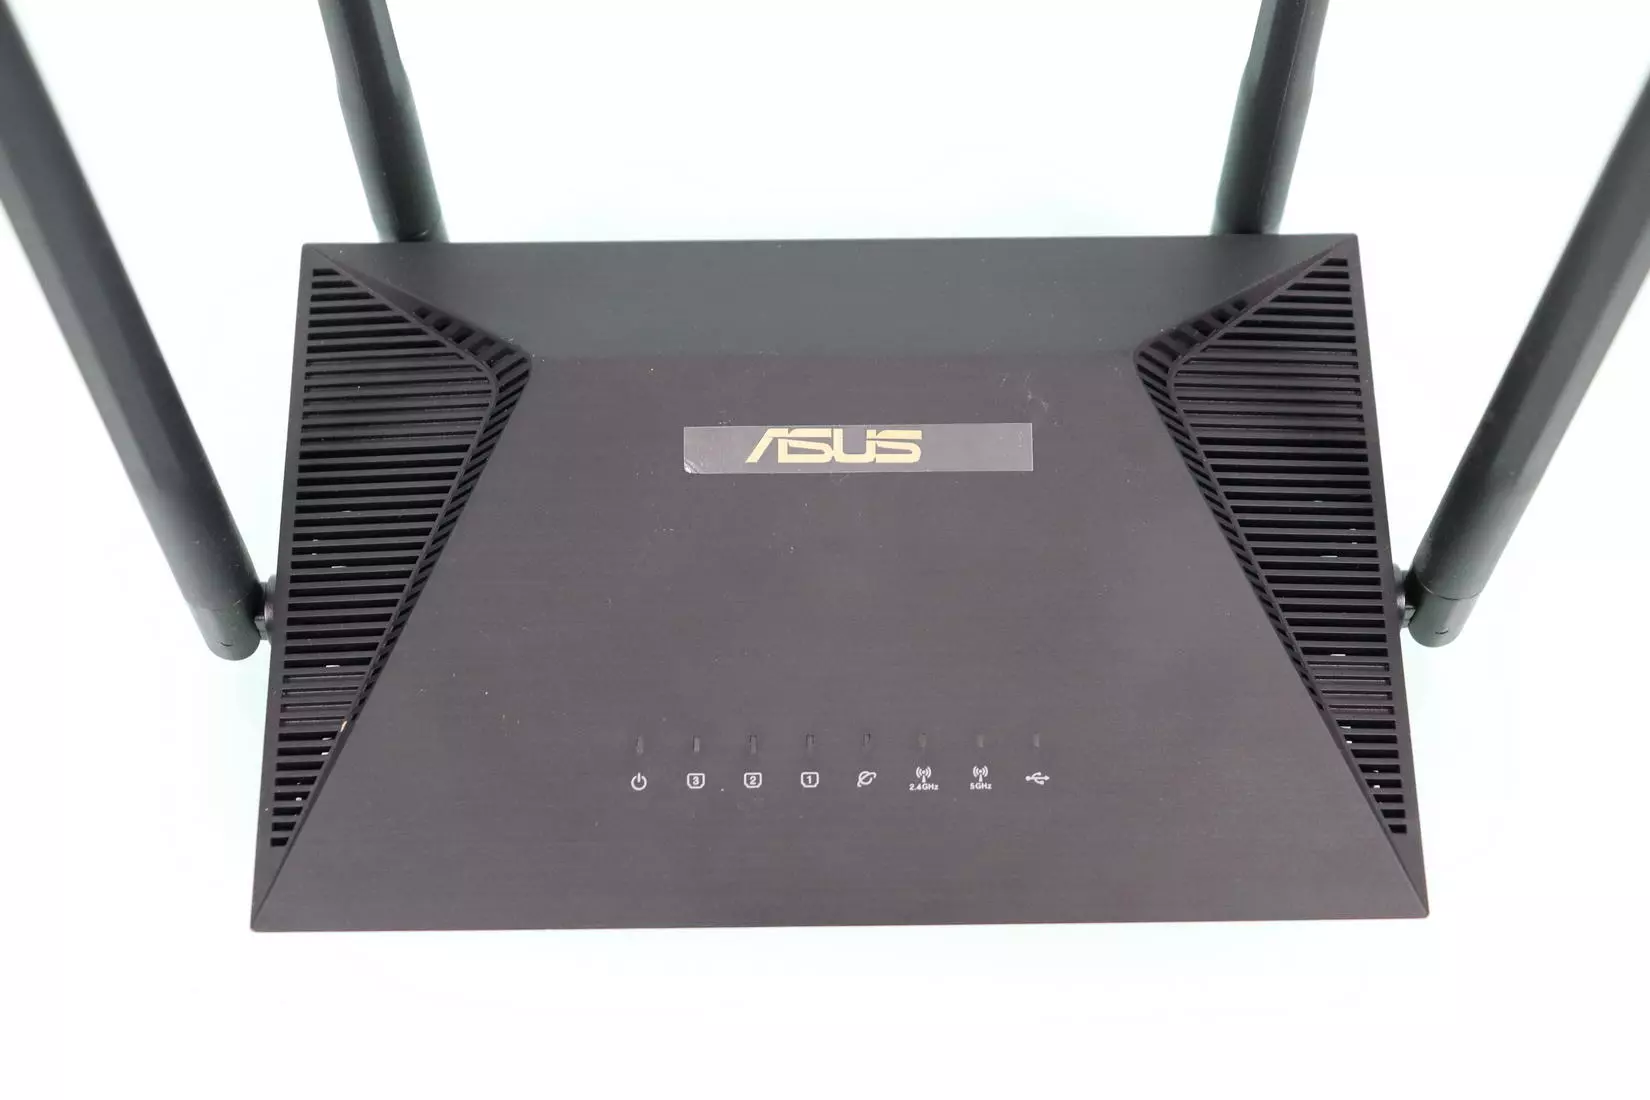 ASUS RT-AX53U Wi-Fi router front